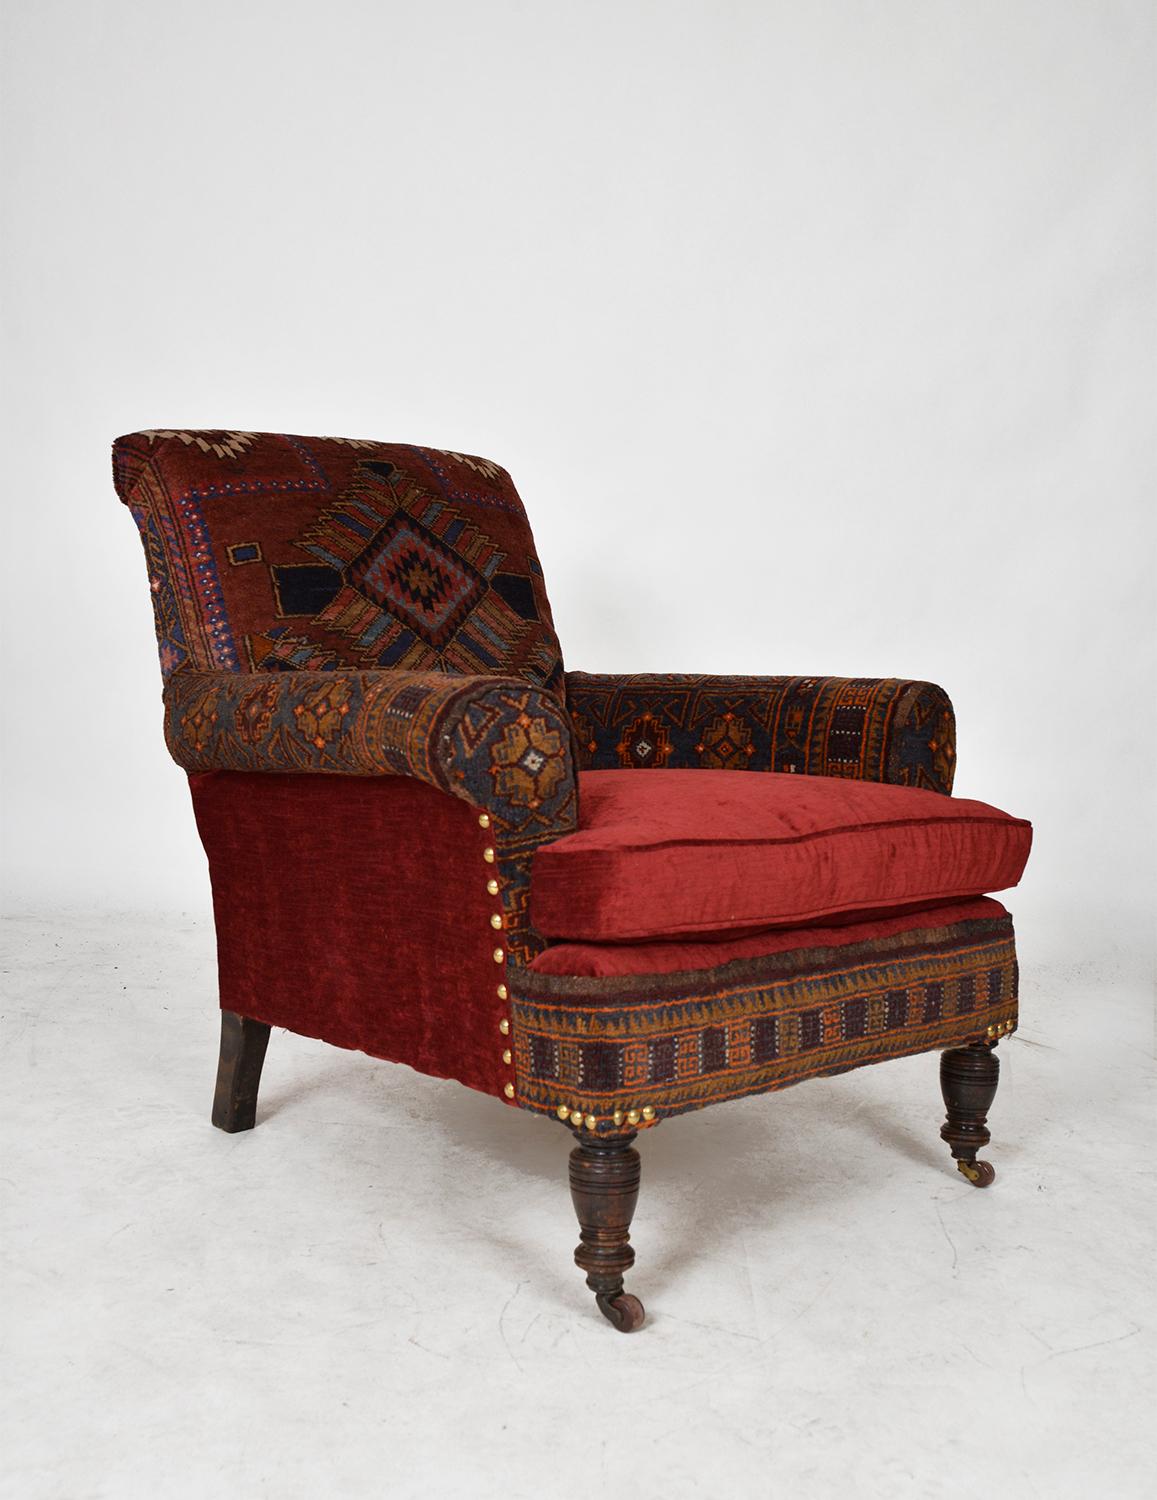 Brass  Antique Baluch Rug Carpet Chair Library Armchair Victorian Bohemian Upholstered